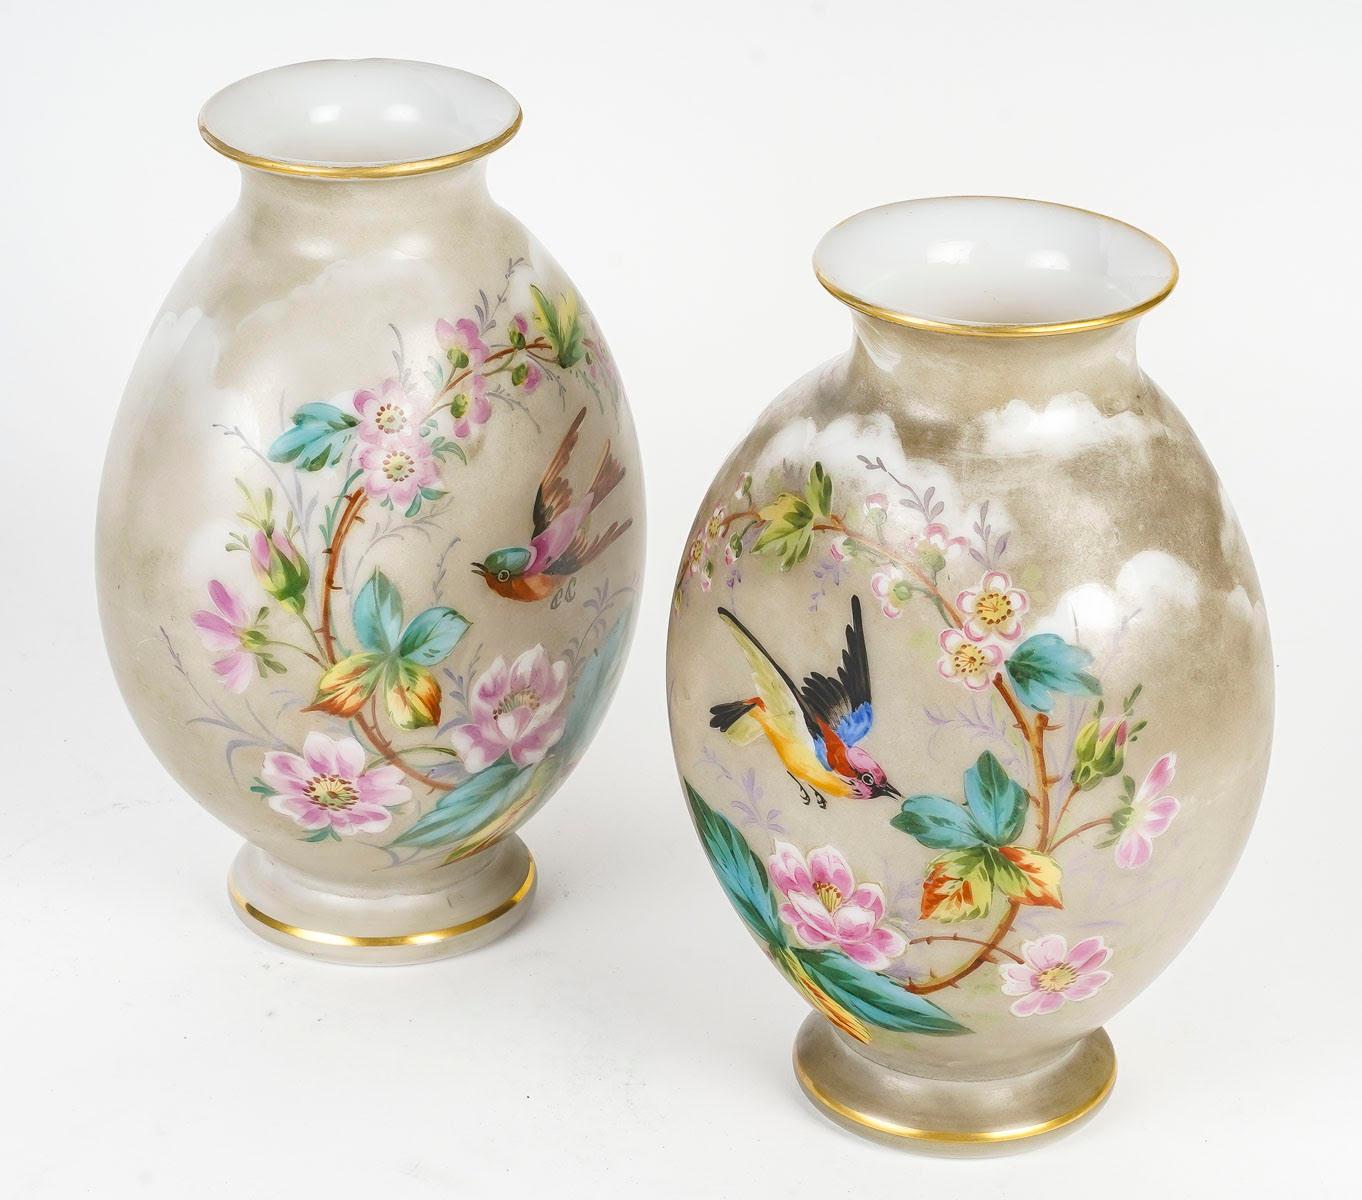 Pair of Baccarat Painted Opaline Vases, Birds and flowers design, 19th Century, Napoleon III period.

A pair of 19th century Baccarat painted opaline vases with bird and flower decorations, Napoleon III period.
h: 24cm, w: 16cm, d: 12cm